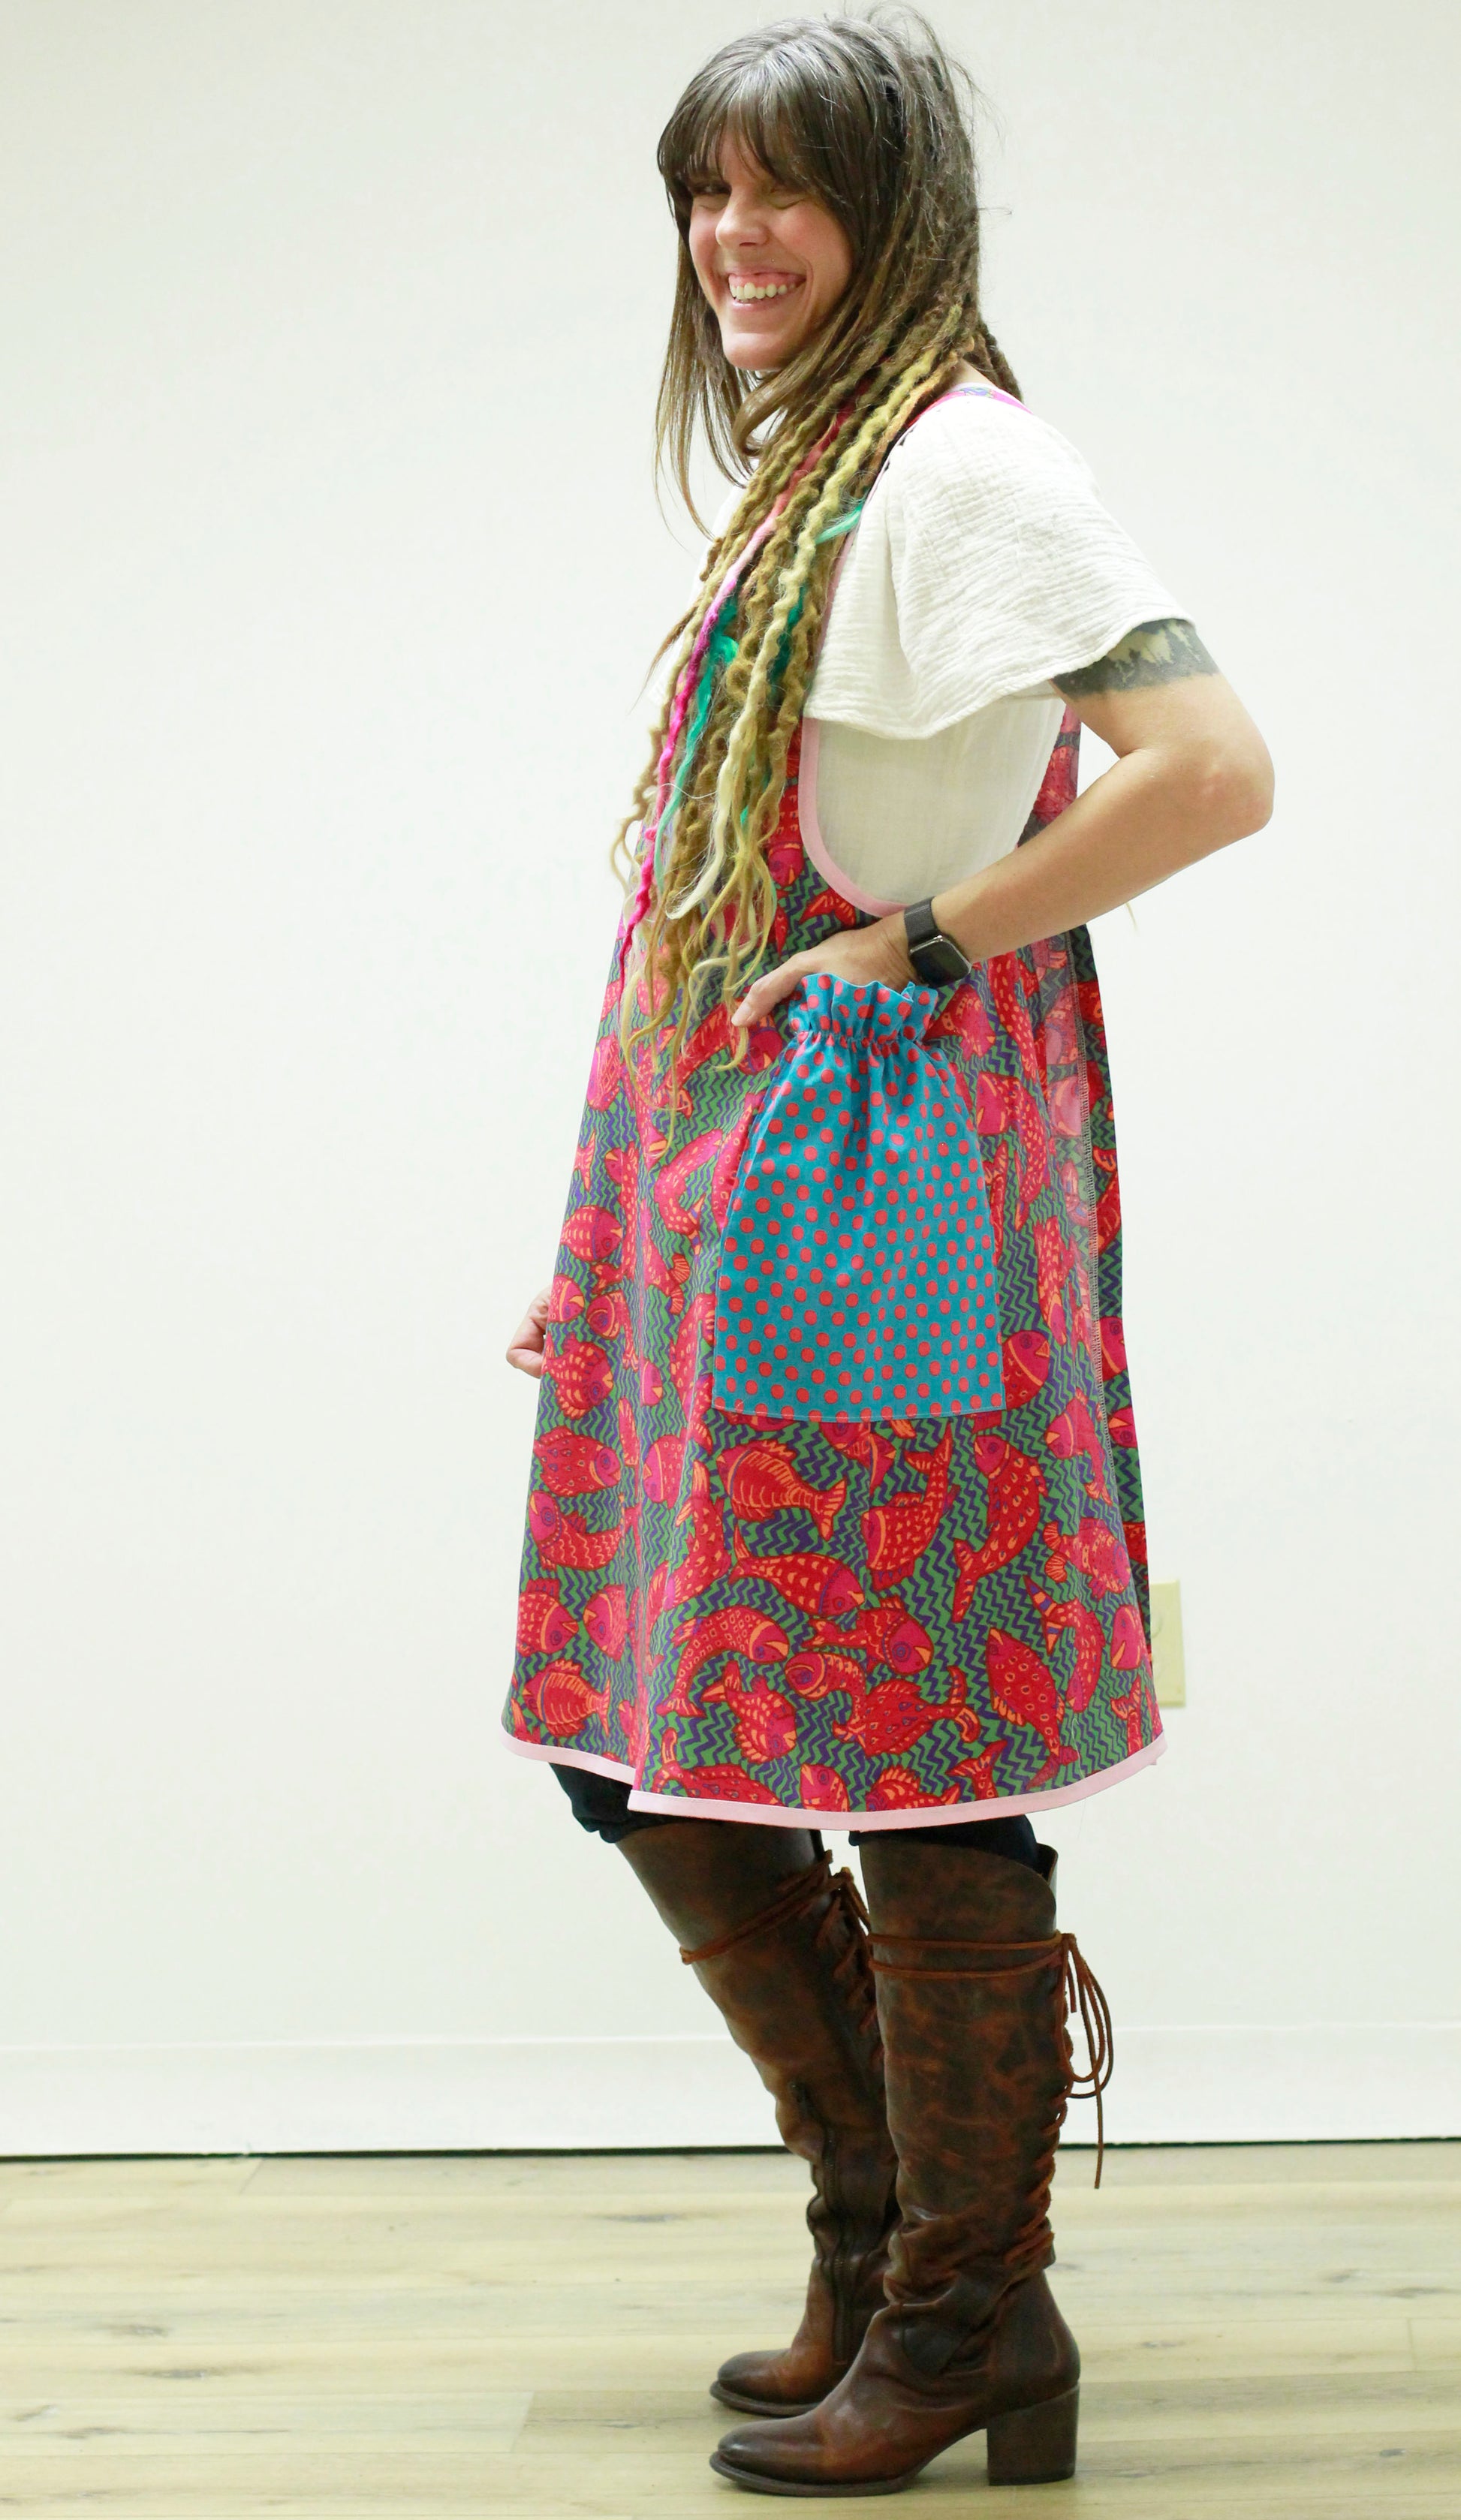 No Tie Apron in Fish and Polka Dots with side view